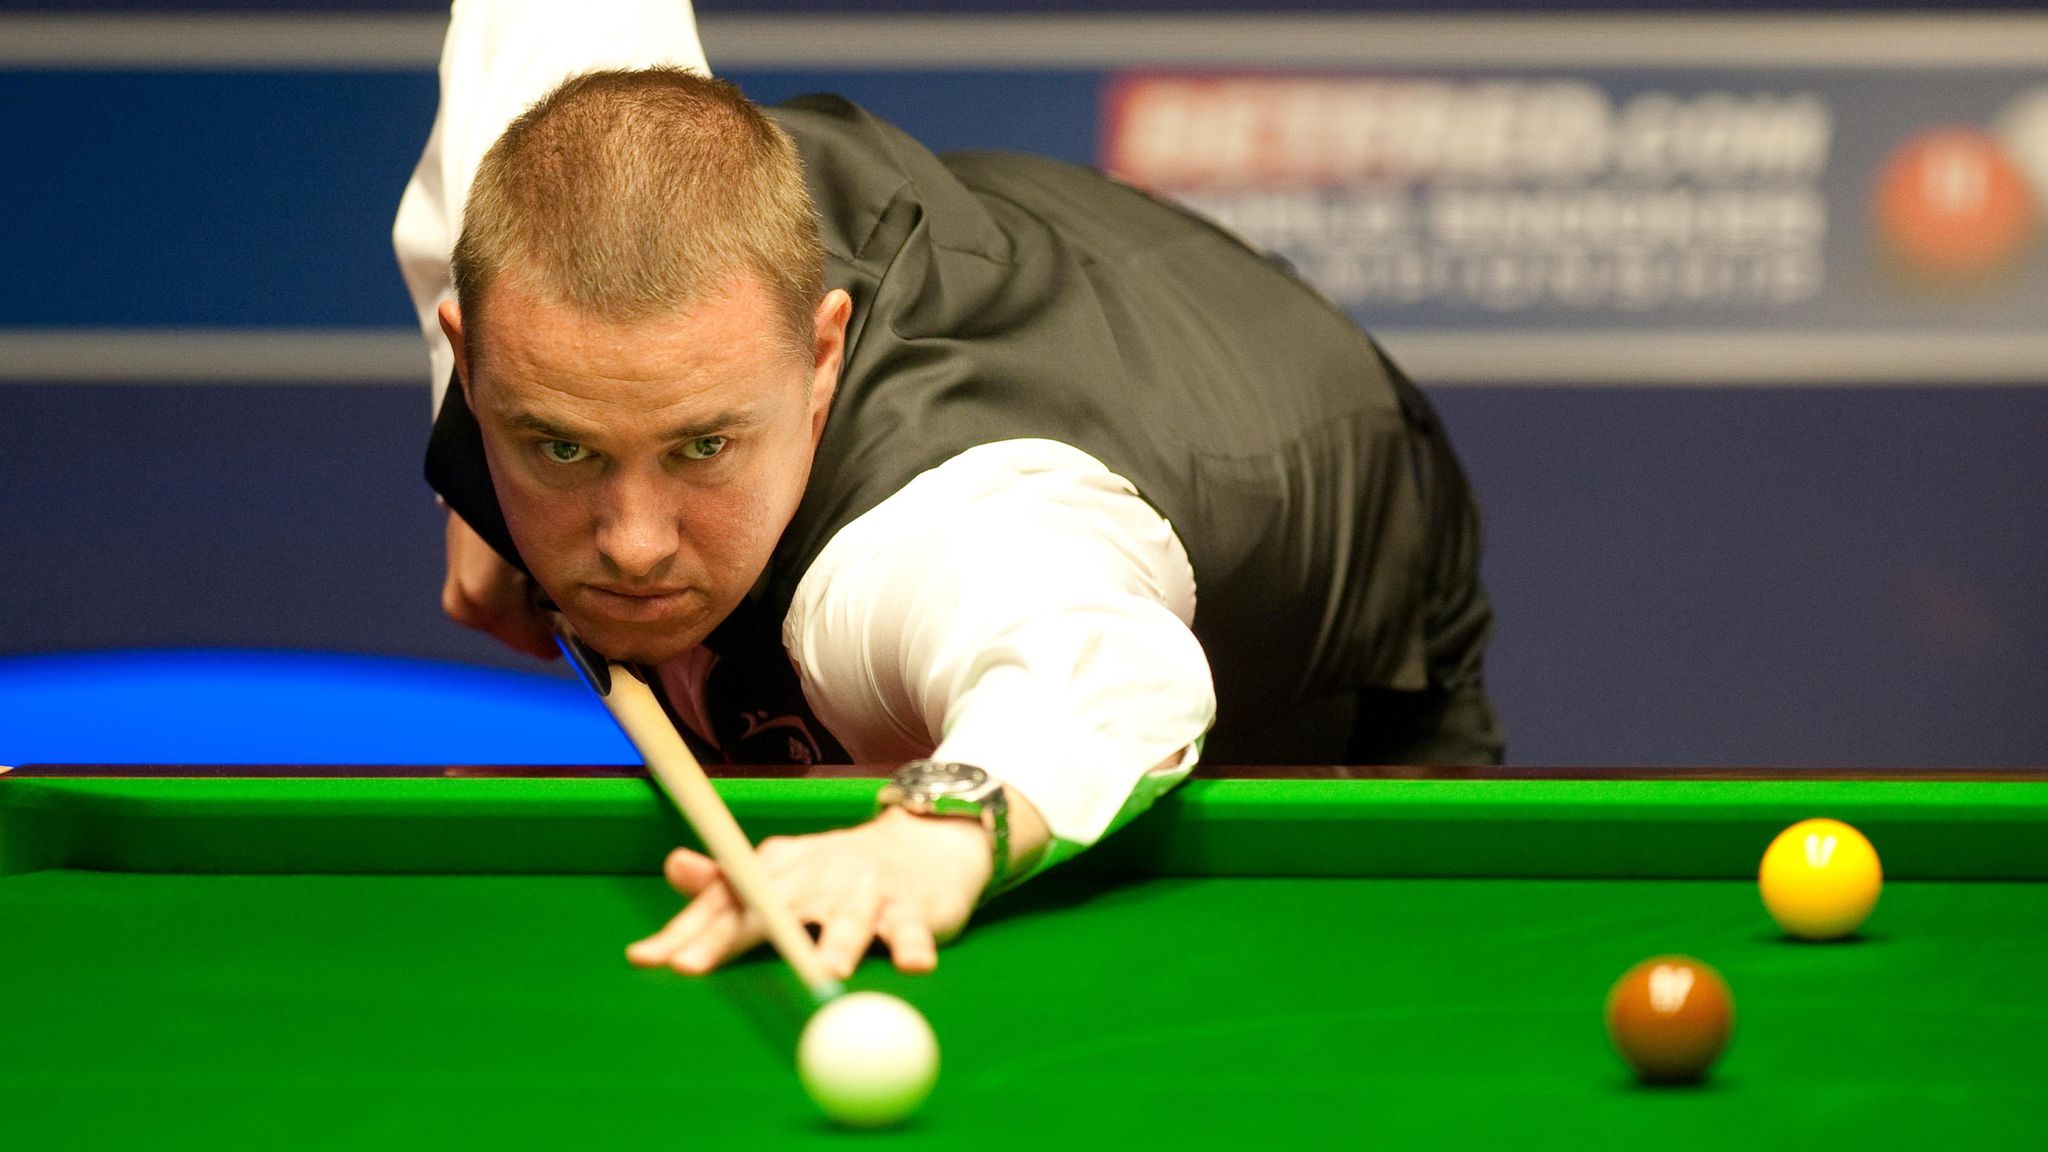 Stephen Hendry and Ken Doherty handed wildcards for next two years from World Snooker Tour Snooker News Sky Sports